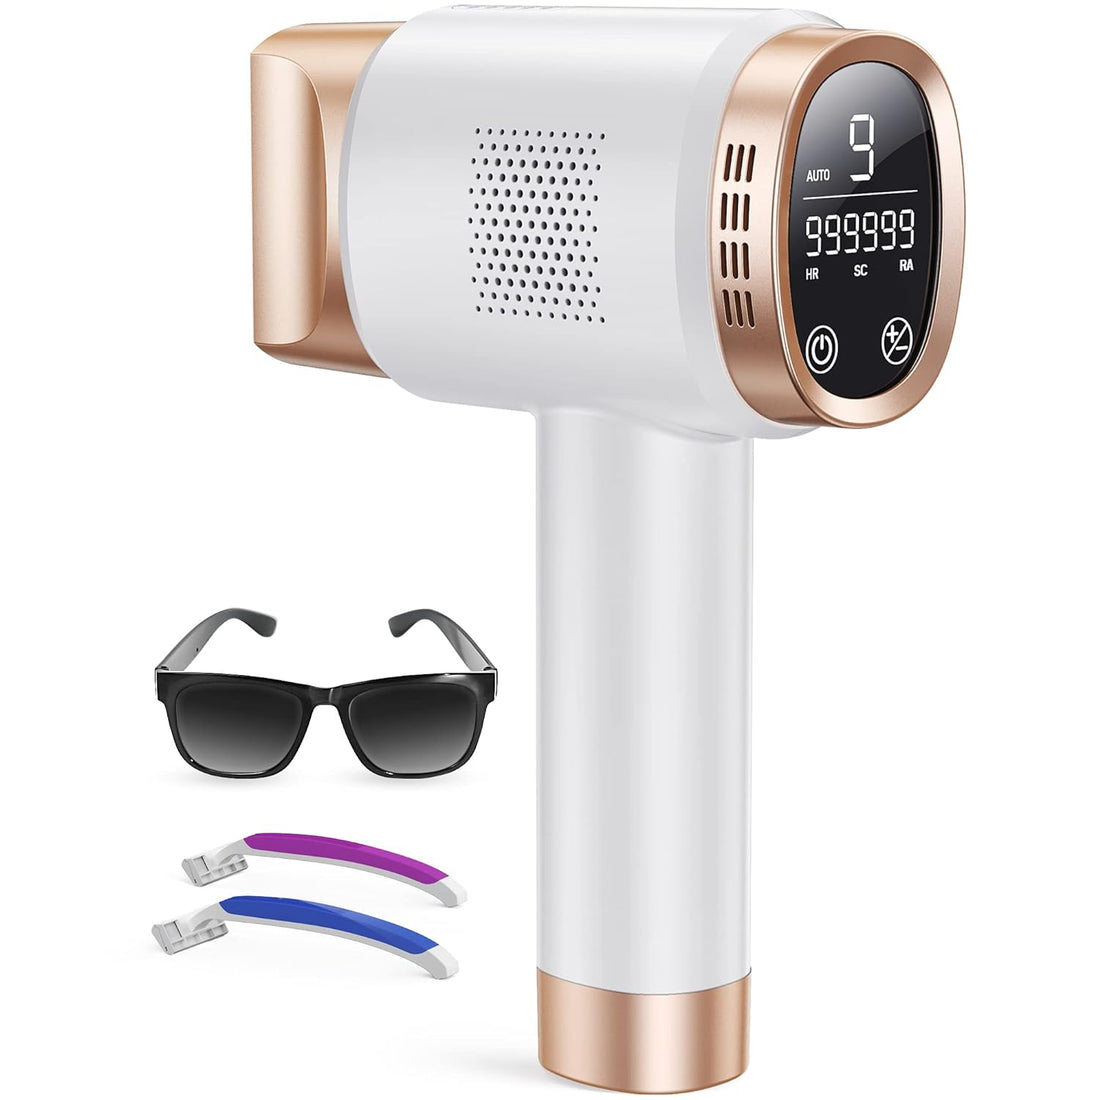 IPL At-Home Hair Removal for Women And Men, Aopvui Laser Permanent Hair Removal Device for Face Arm Leg Back Whole Body Use